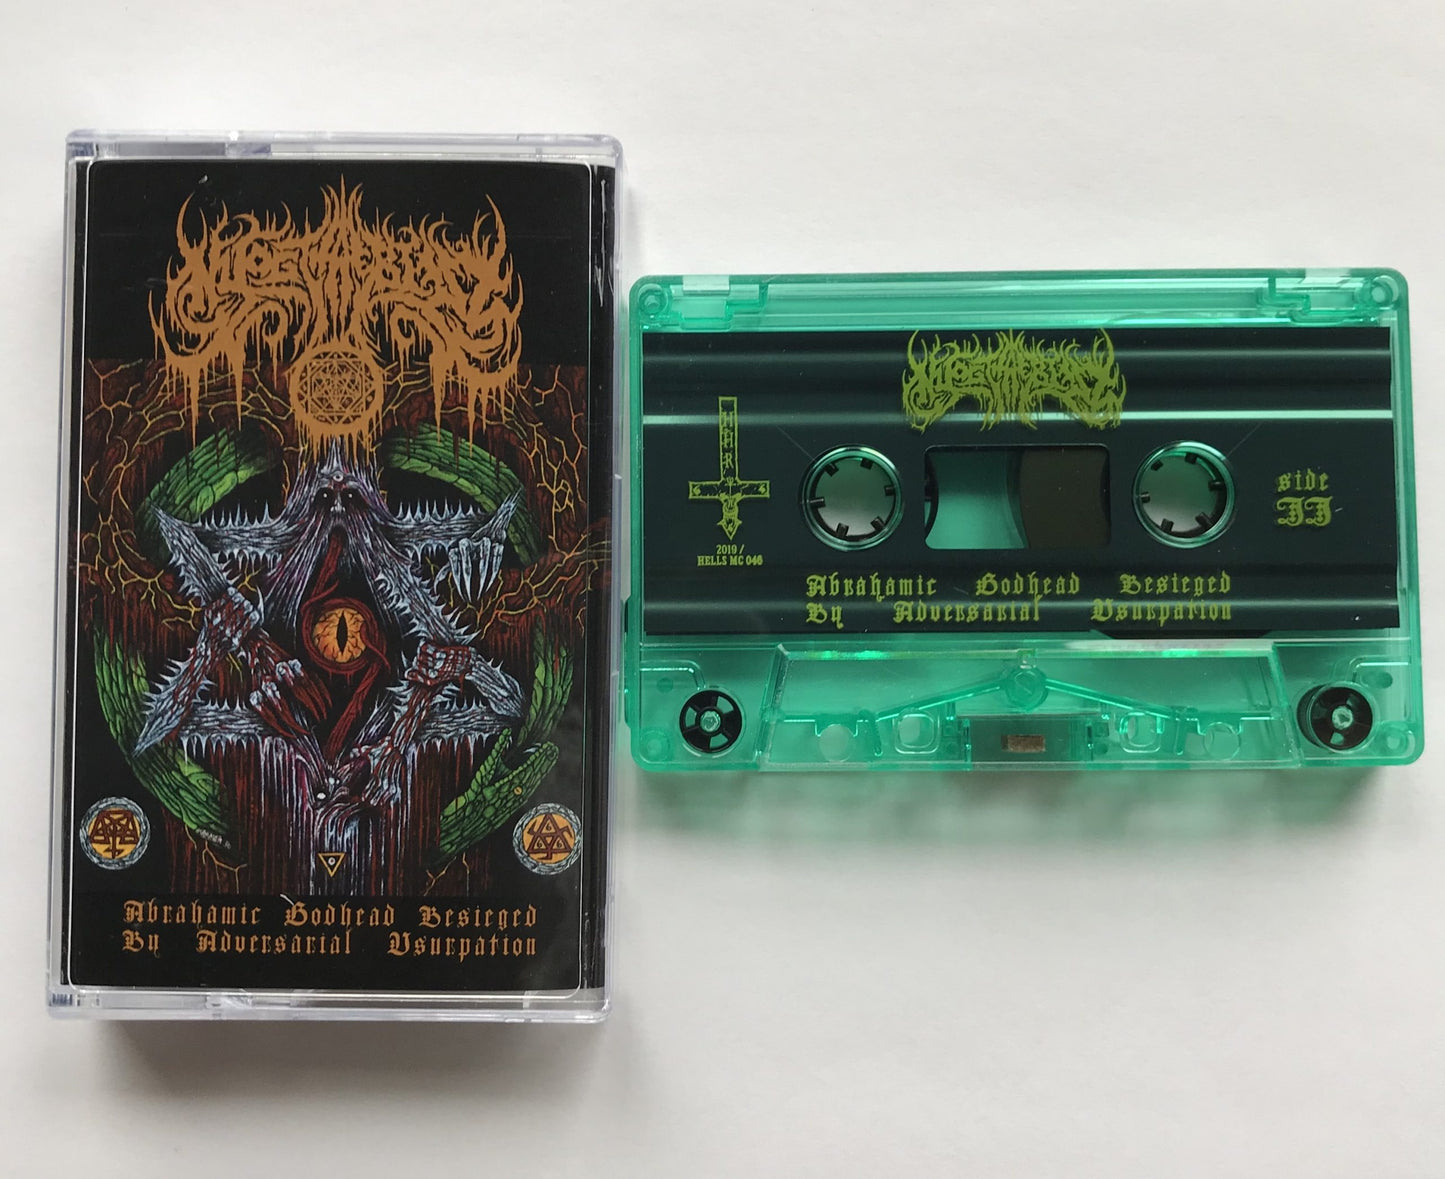 Nyogthaeblisz - Abrahamic Godhead Besieged by Adversarial Usurpation Cassette